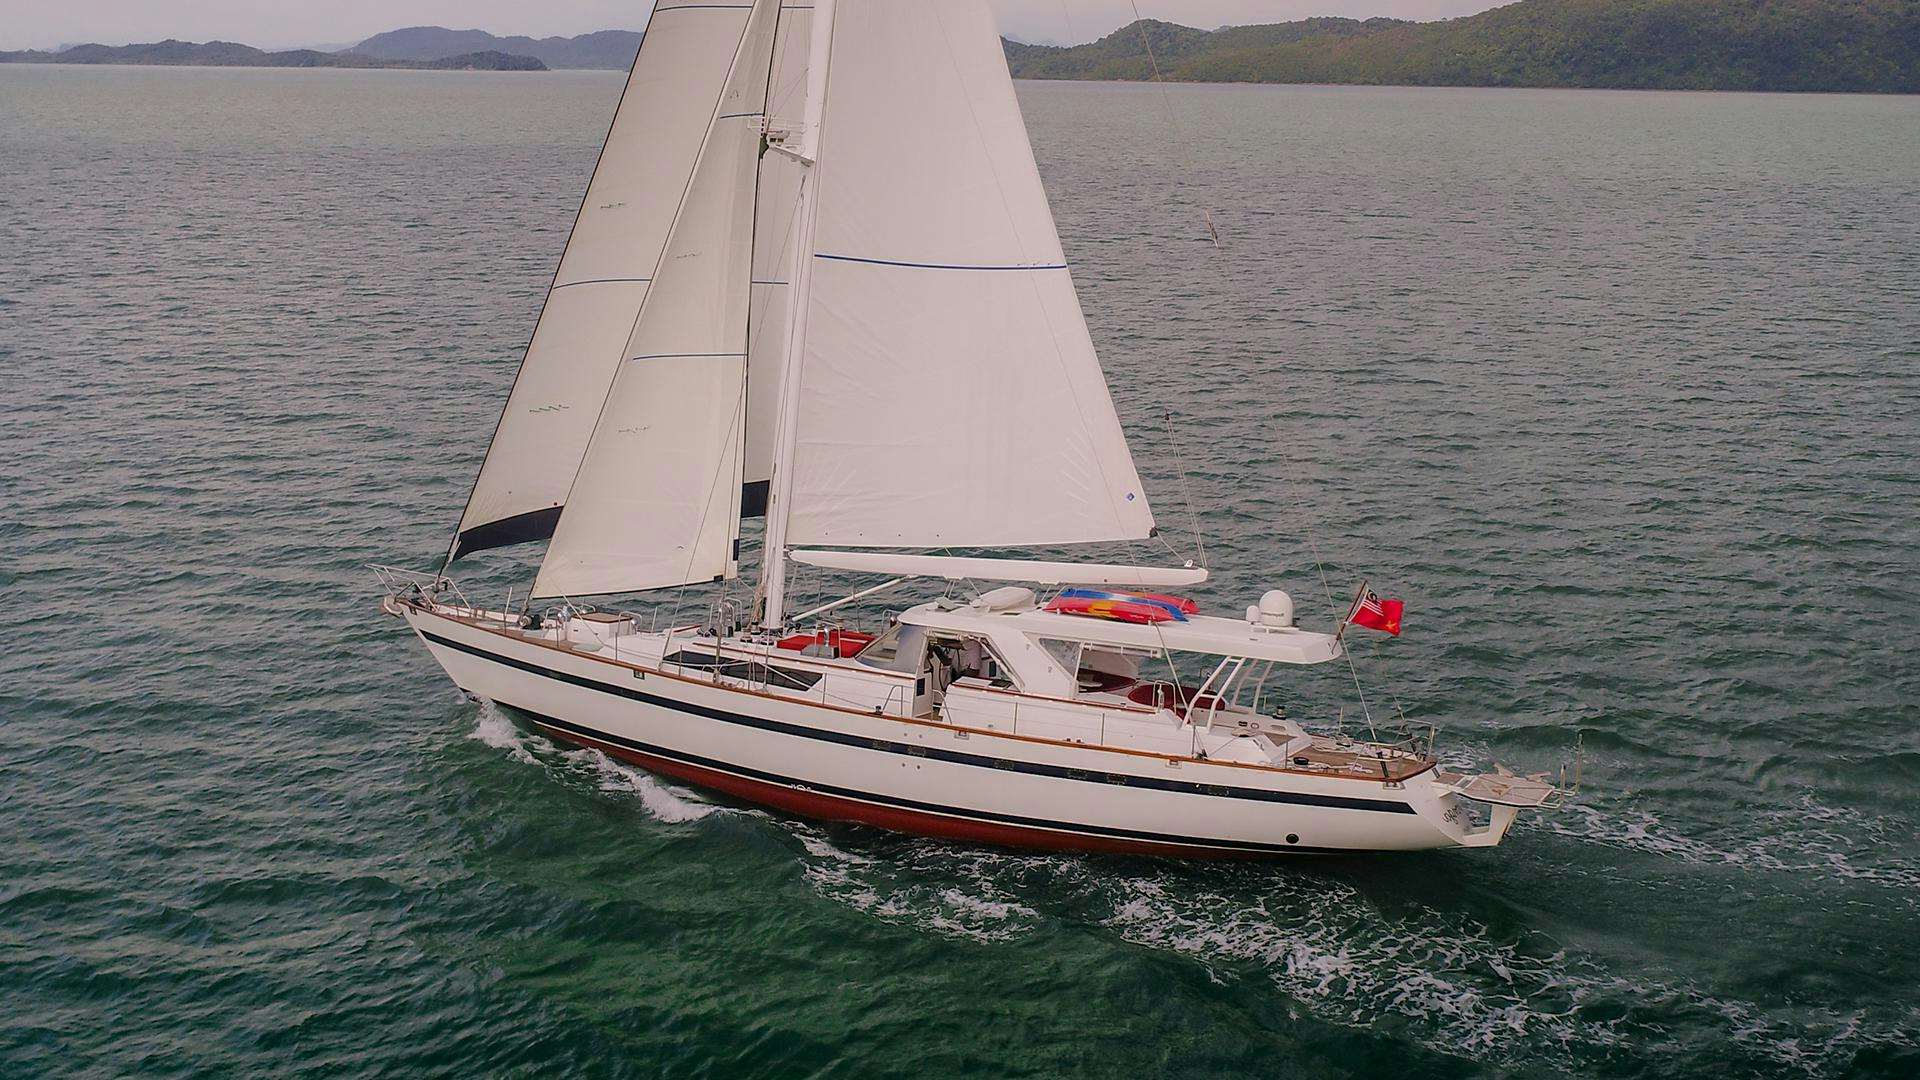 Watch Video for TARONGA Yacht for Sale